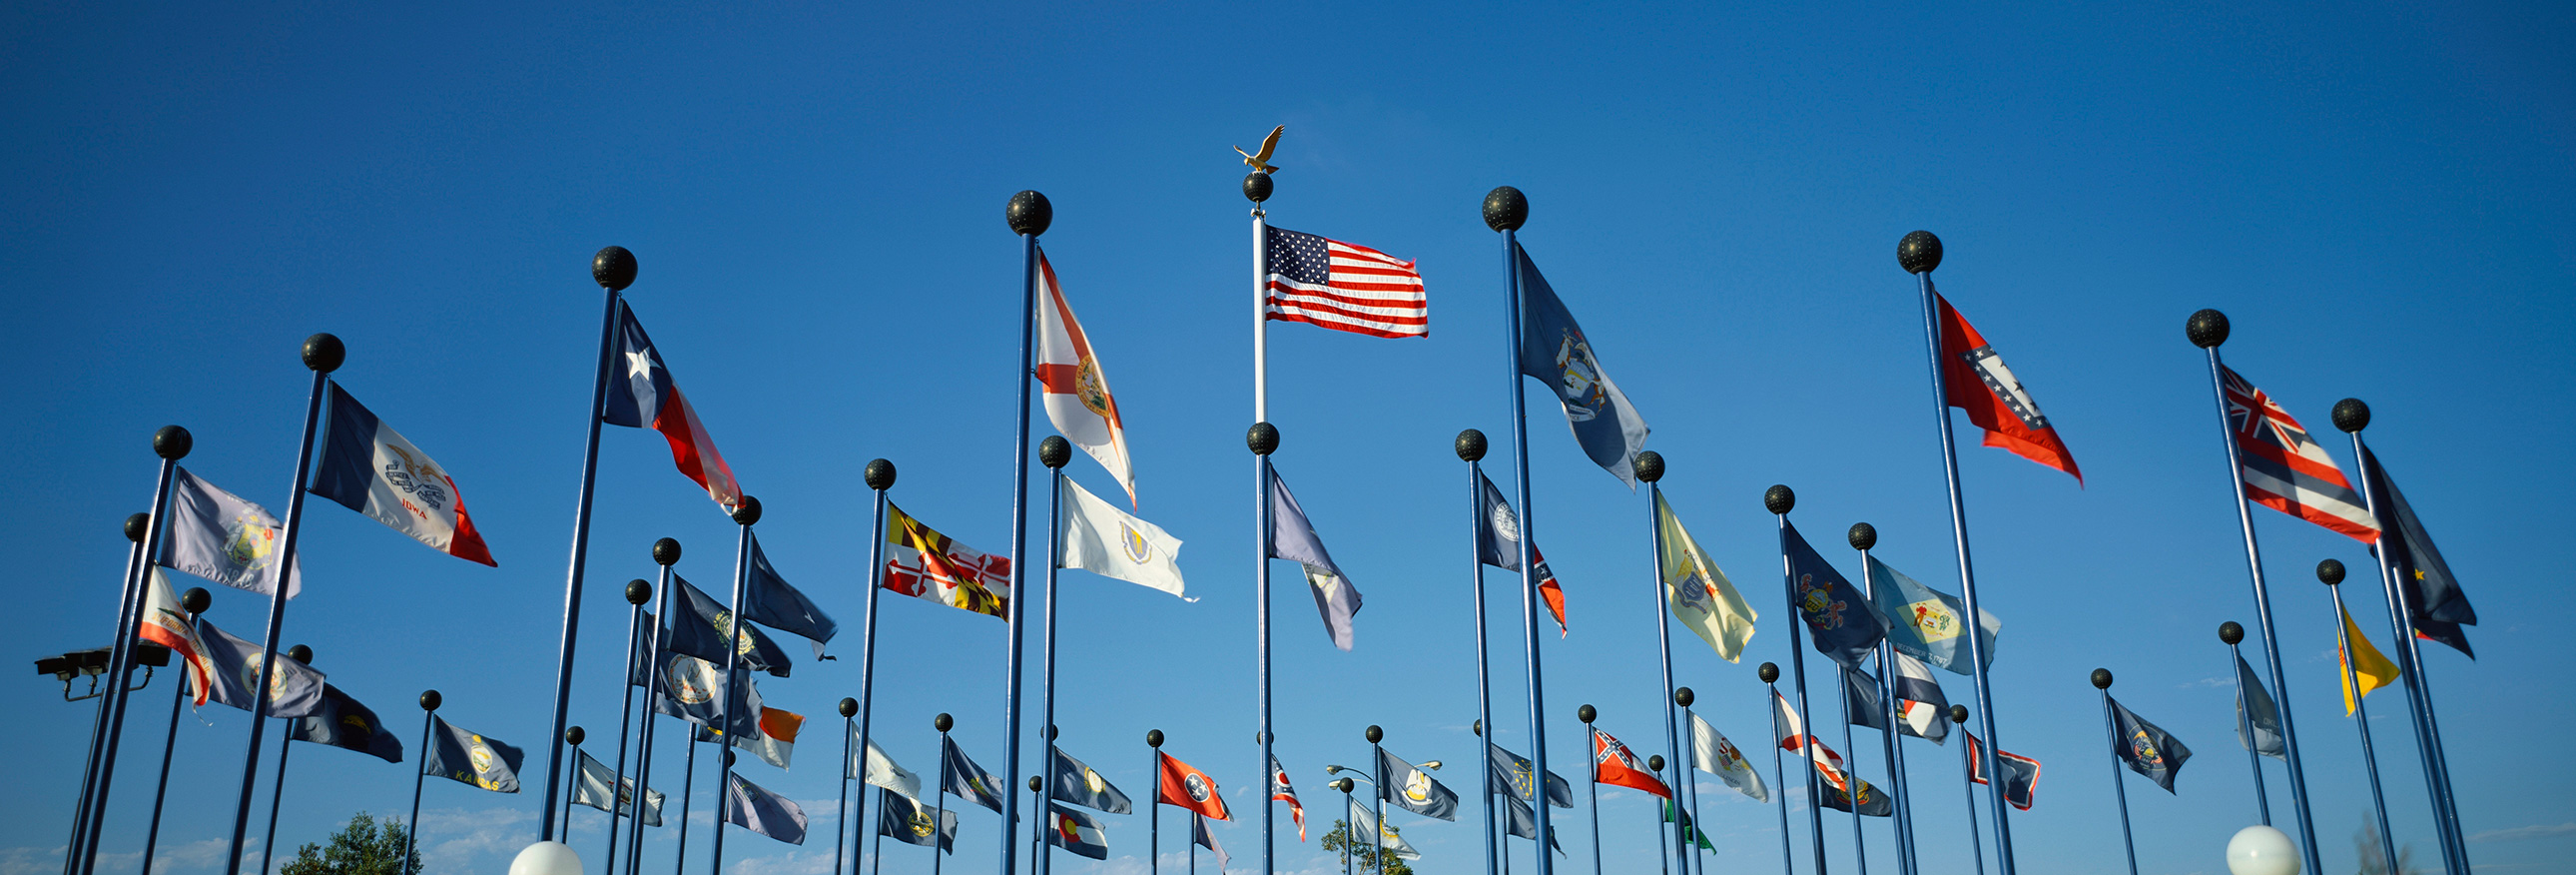 US state flags on flagpoles against a blue sky